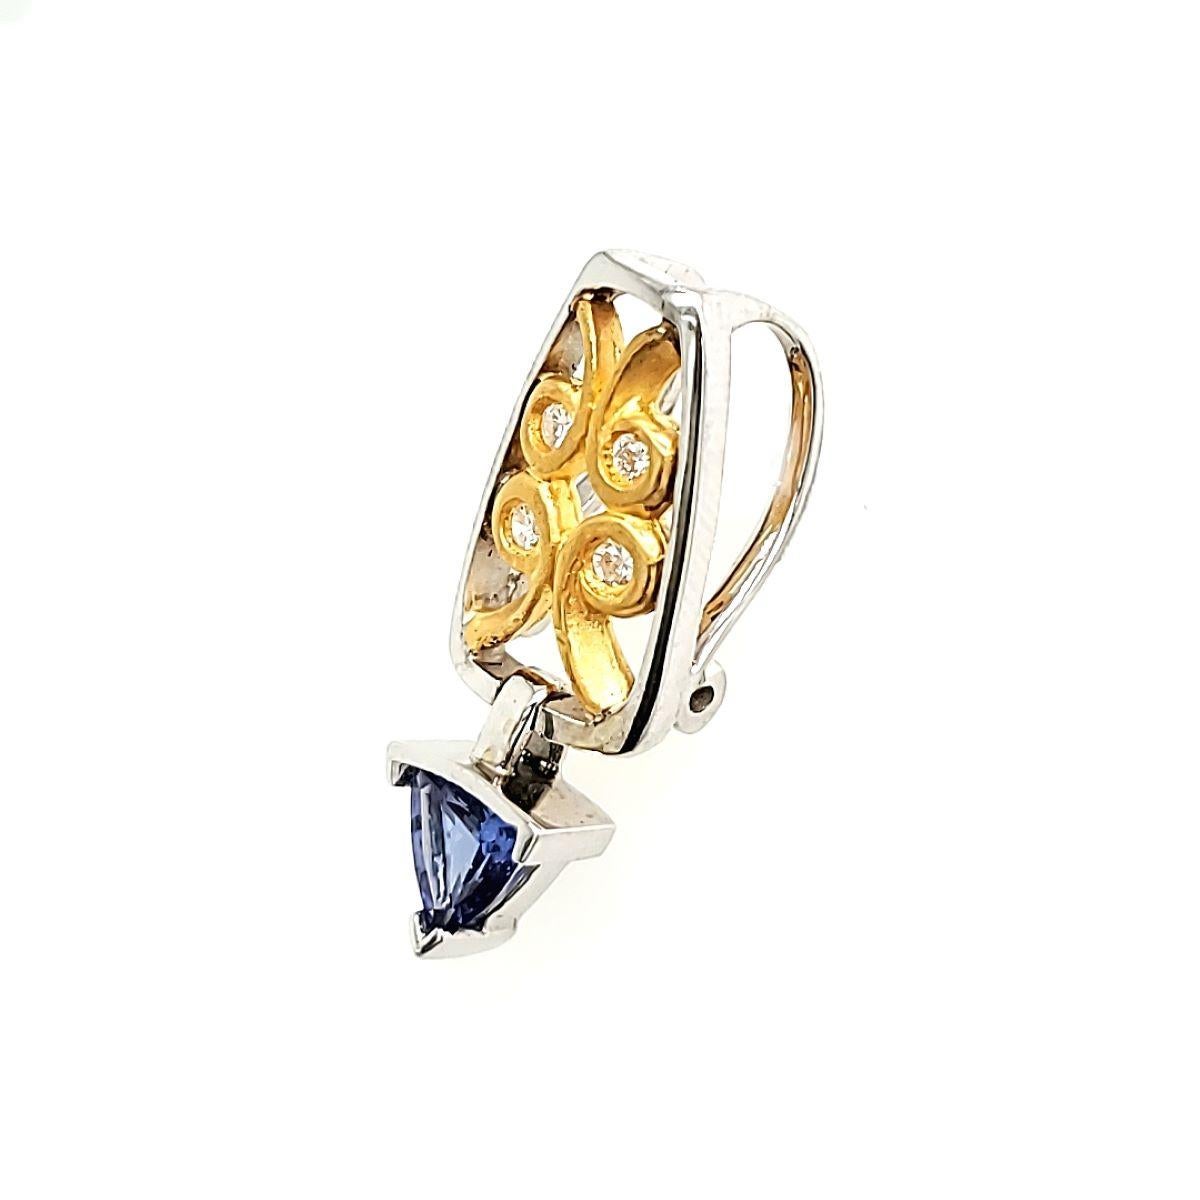 This pendant is a show-stopping piece that adds a touch of glamour to any outfit.

It is expertly crafted and has a breathtaking 0.73 carat triangle-shaped Tanzanite suspended elegantly by a bale embellished with an alluring swirl yellow gold